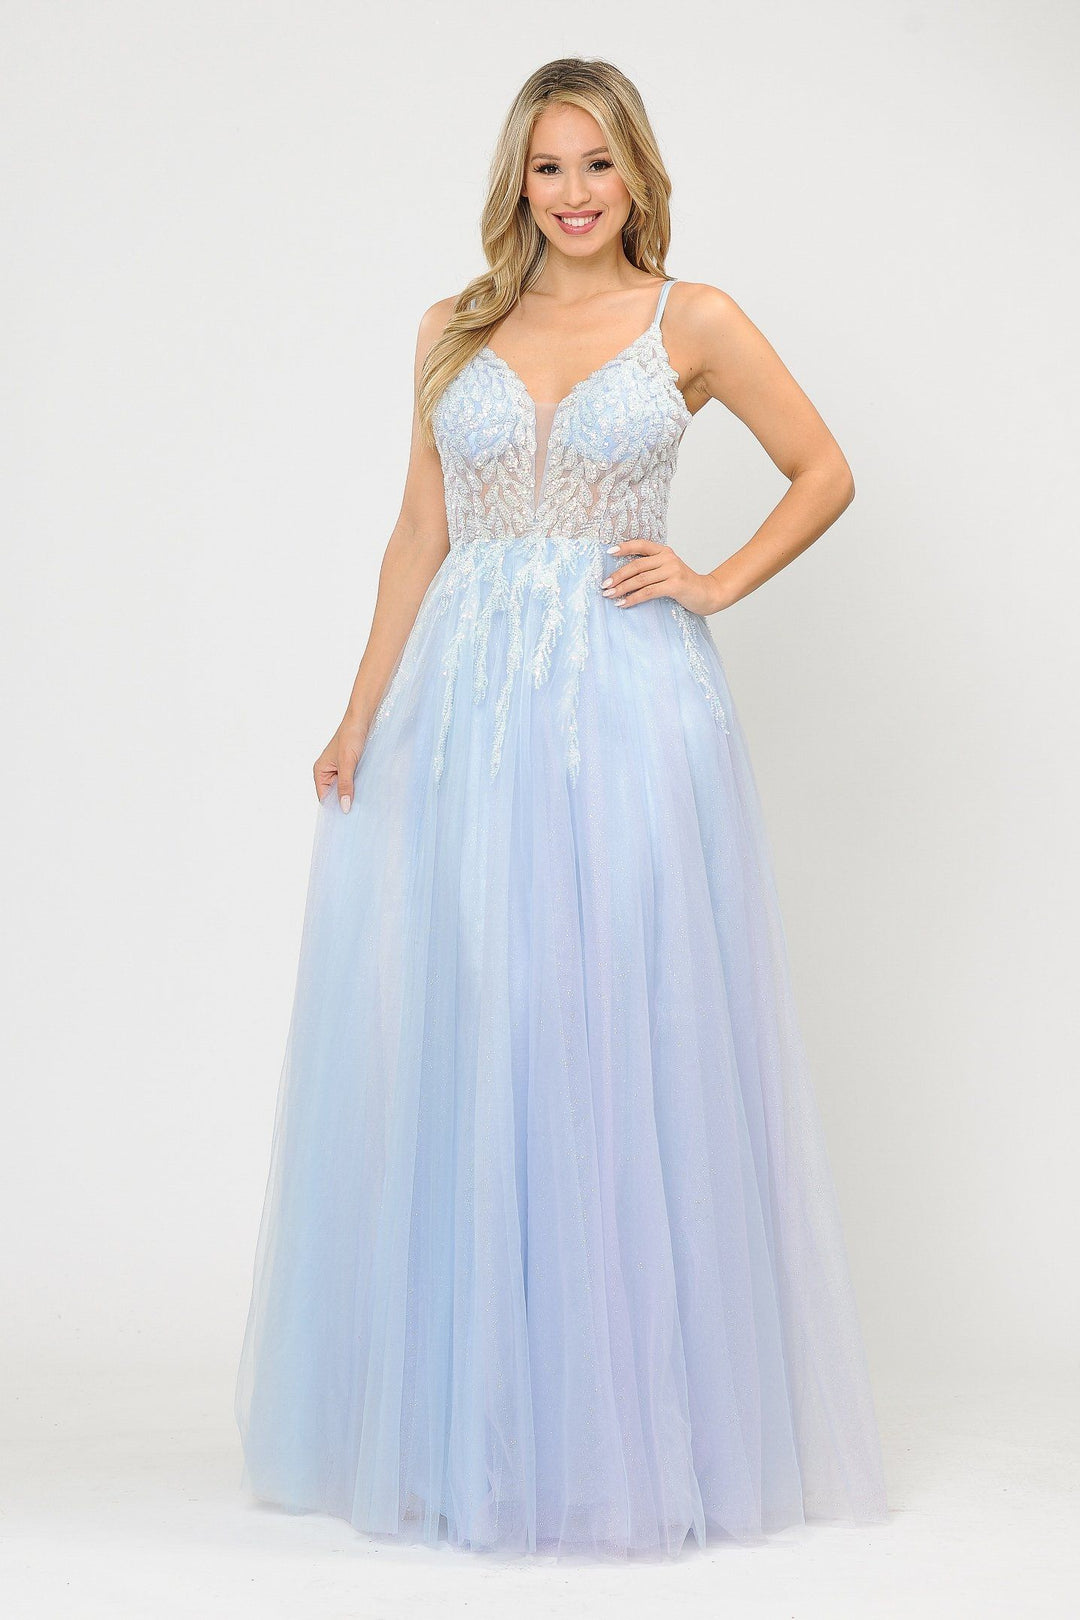 Long Glitter Dress with Embellished Bodice by Poly USA 8718